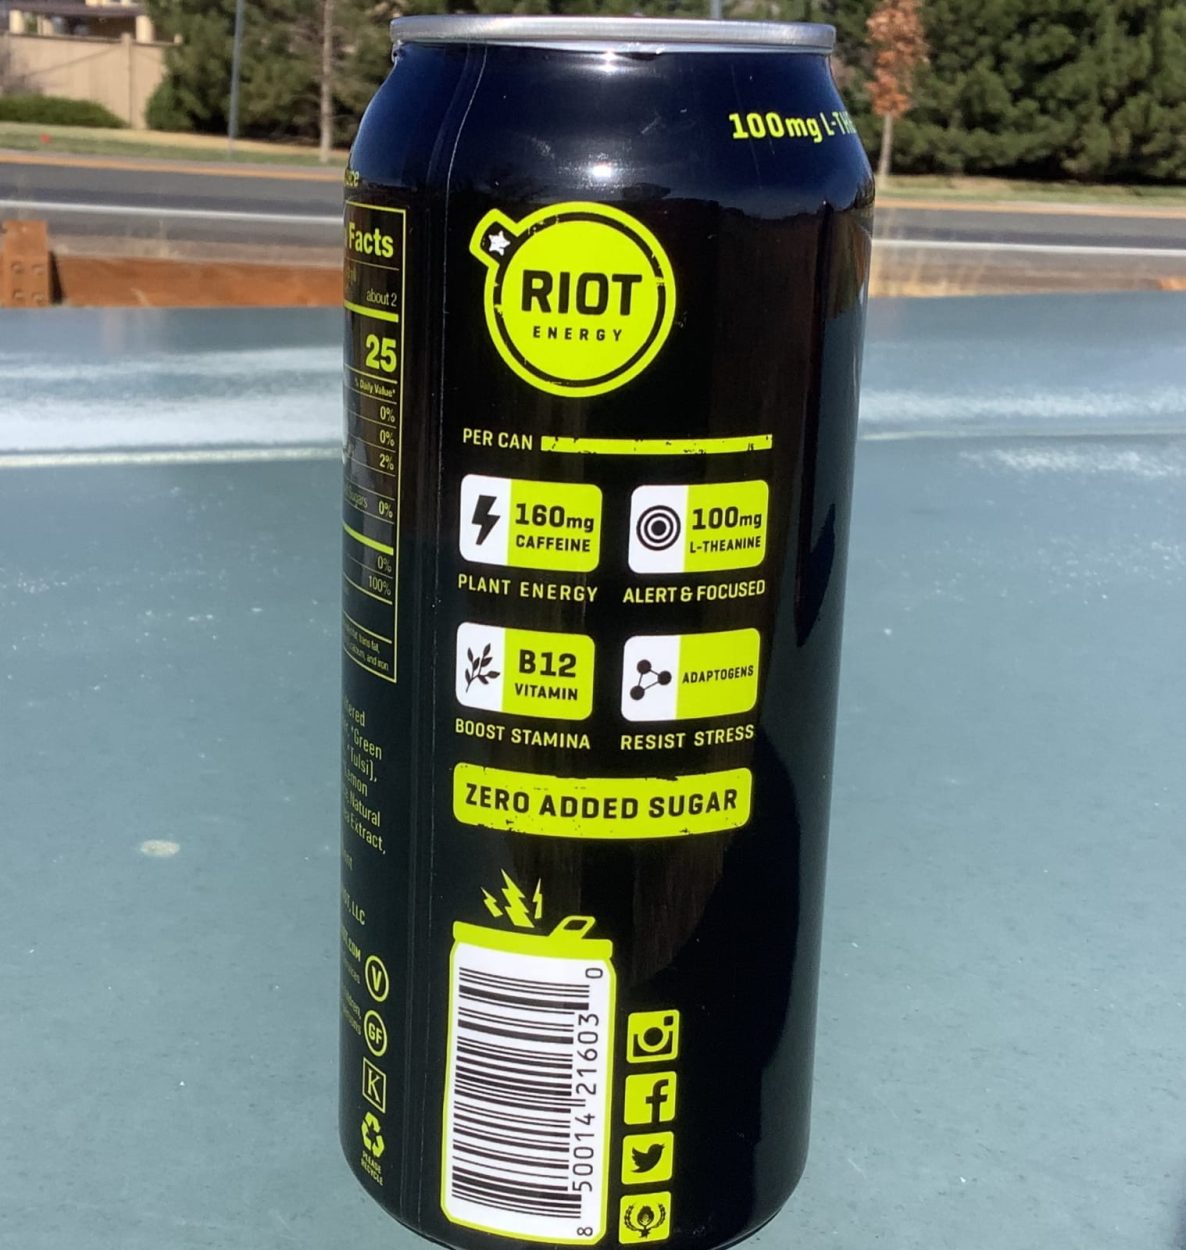 Riot comprises of main flavorful ingredients